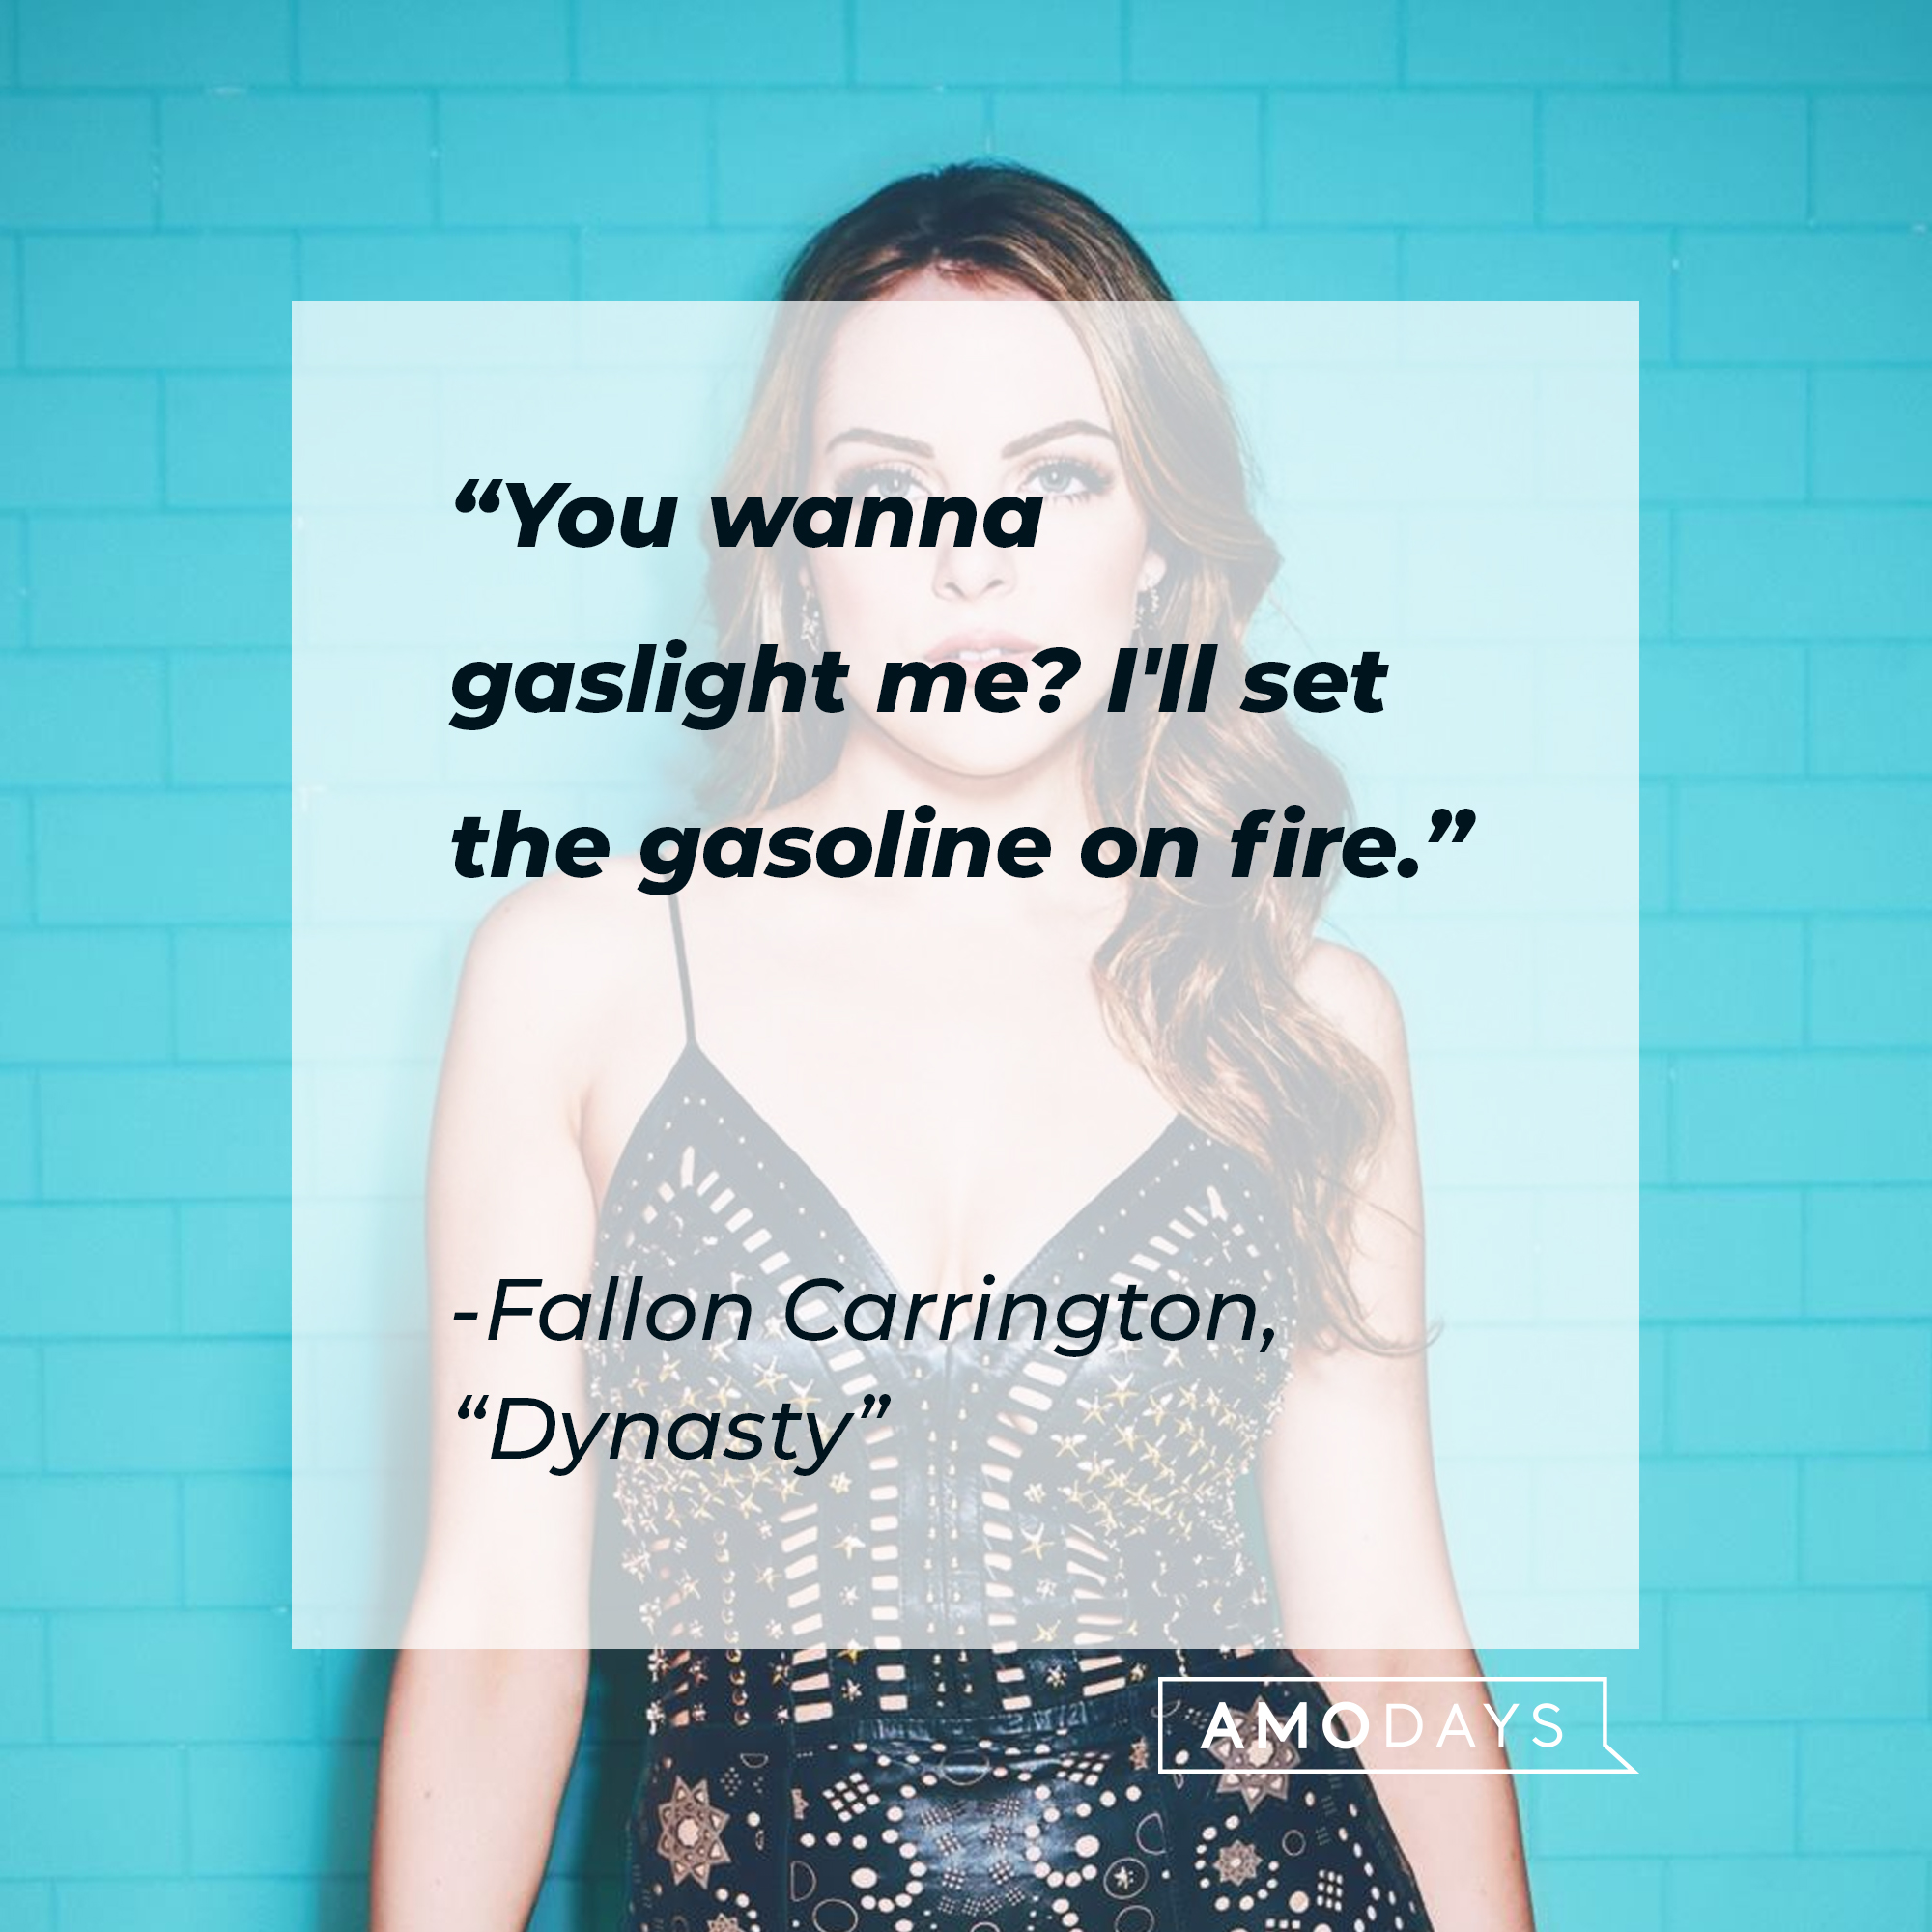 Fallon Carrington’s quote from “Dynasty”: “You wanna gaslight me? I'll set the gasoline on fire.” | Source: facebook.com/DynastyOnTheCW